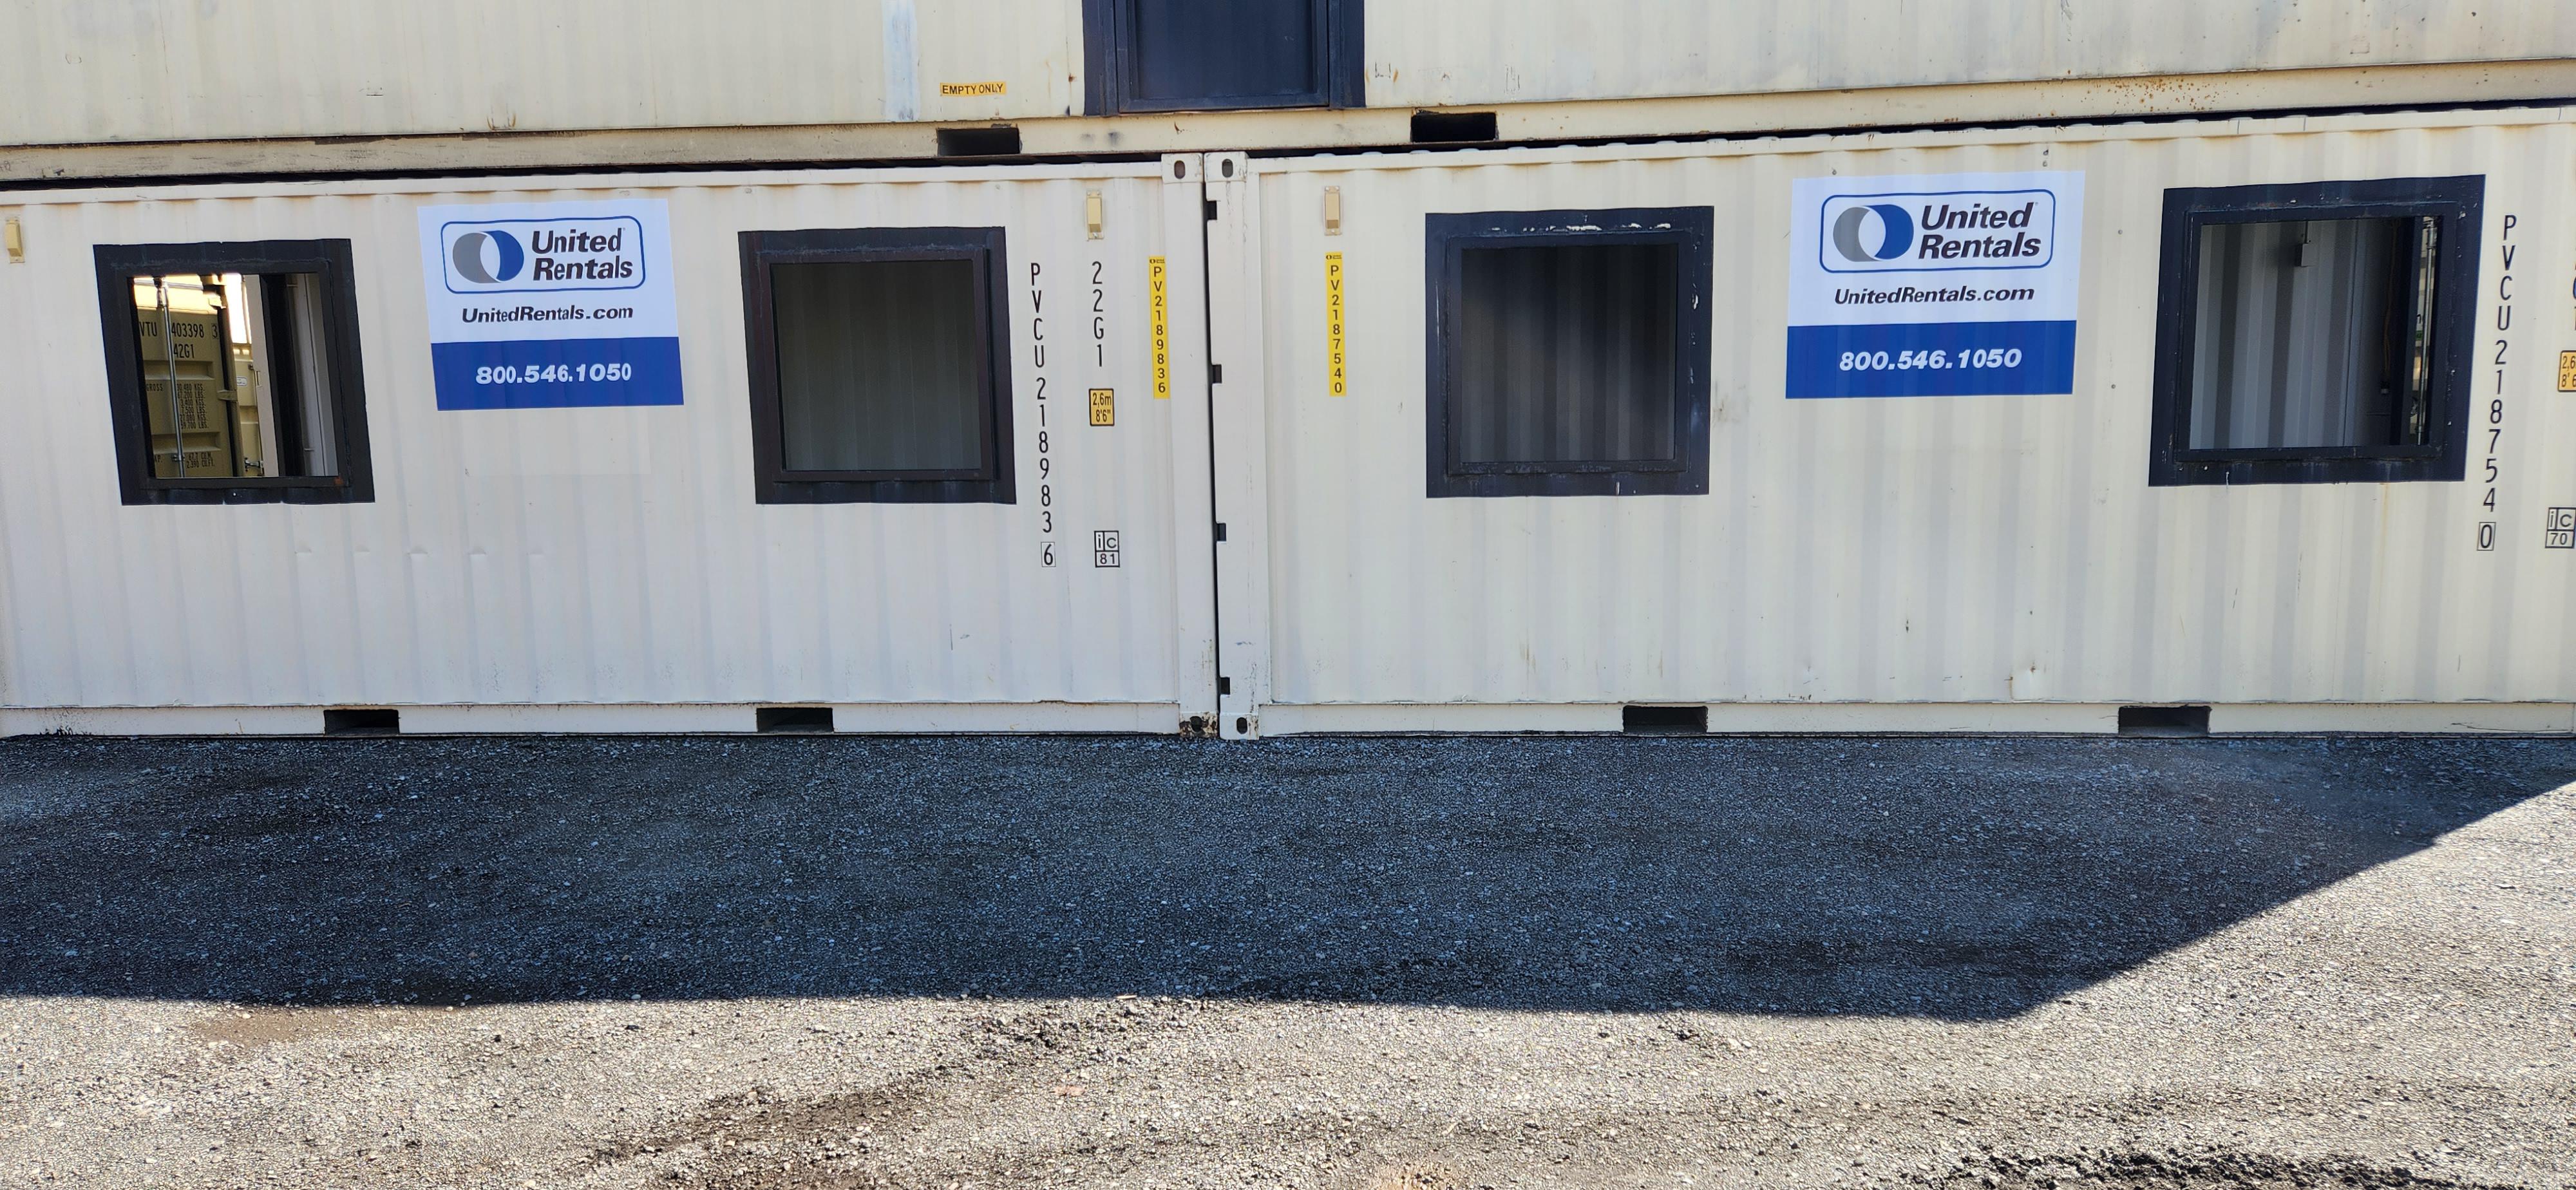 Fotos de United Rentals - Storage Containers and Mobile Offices